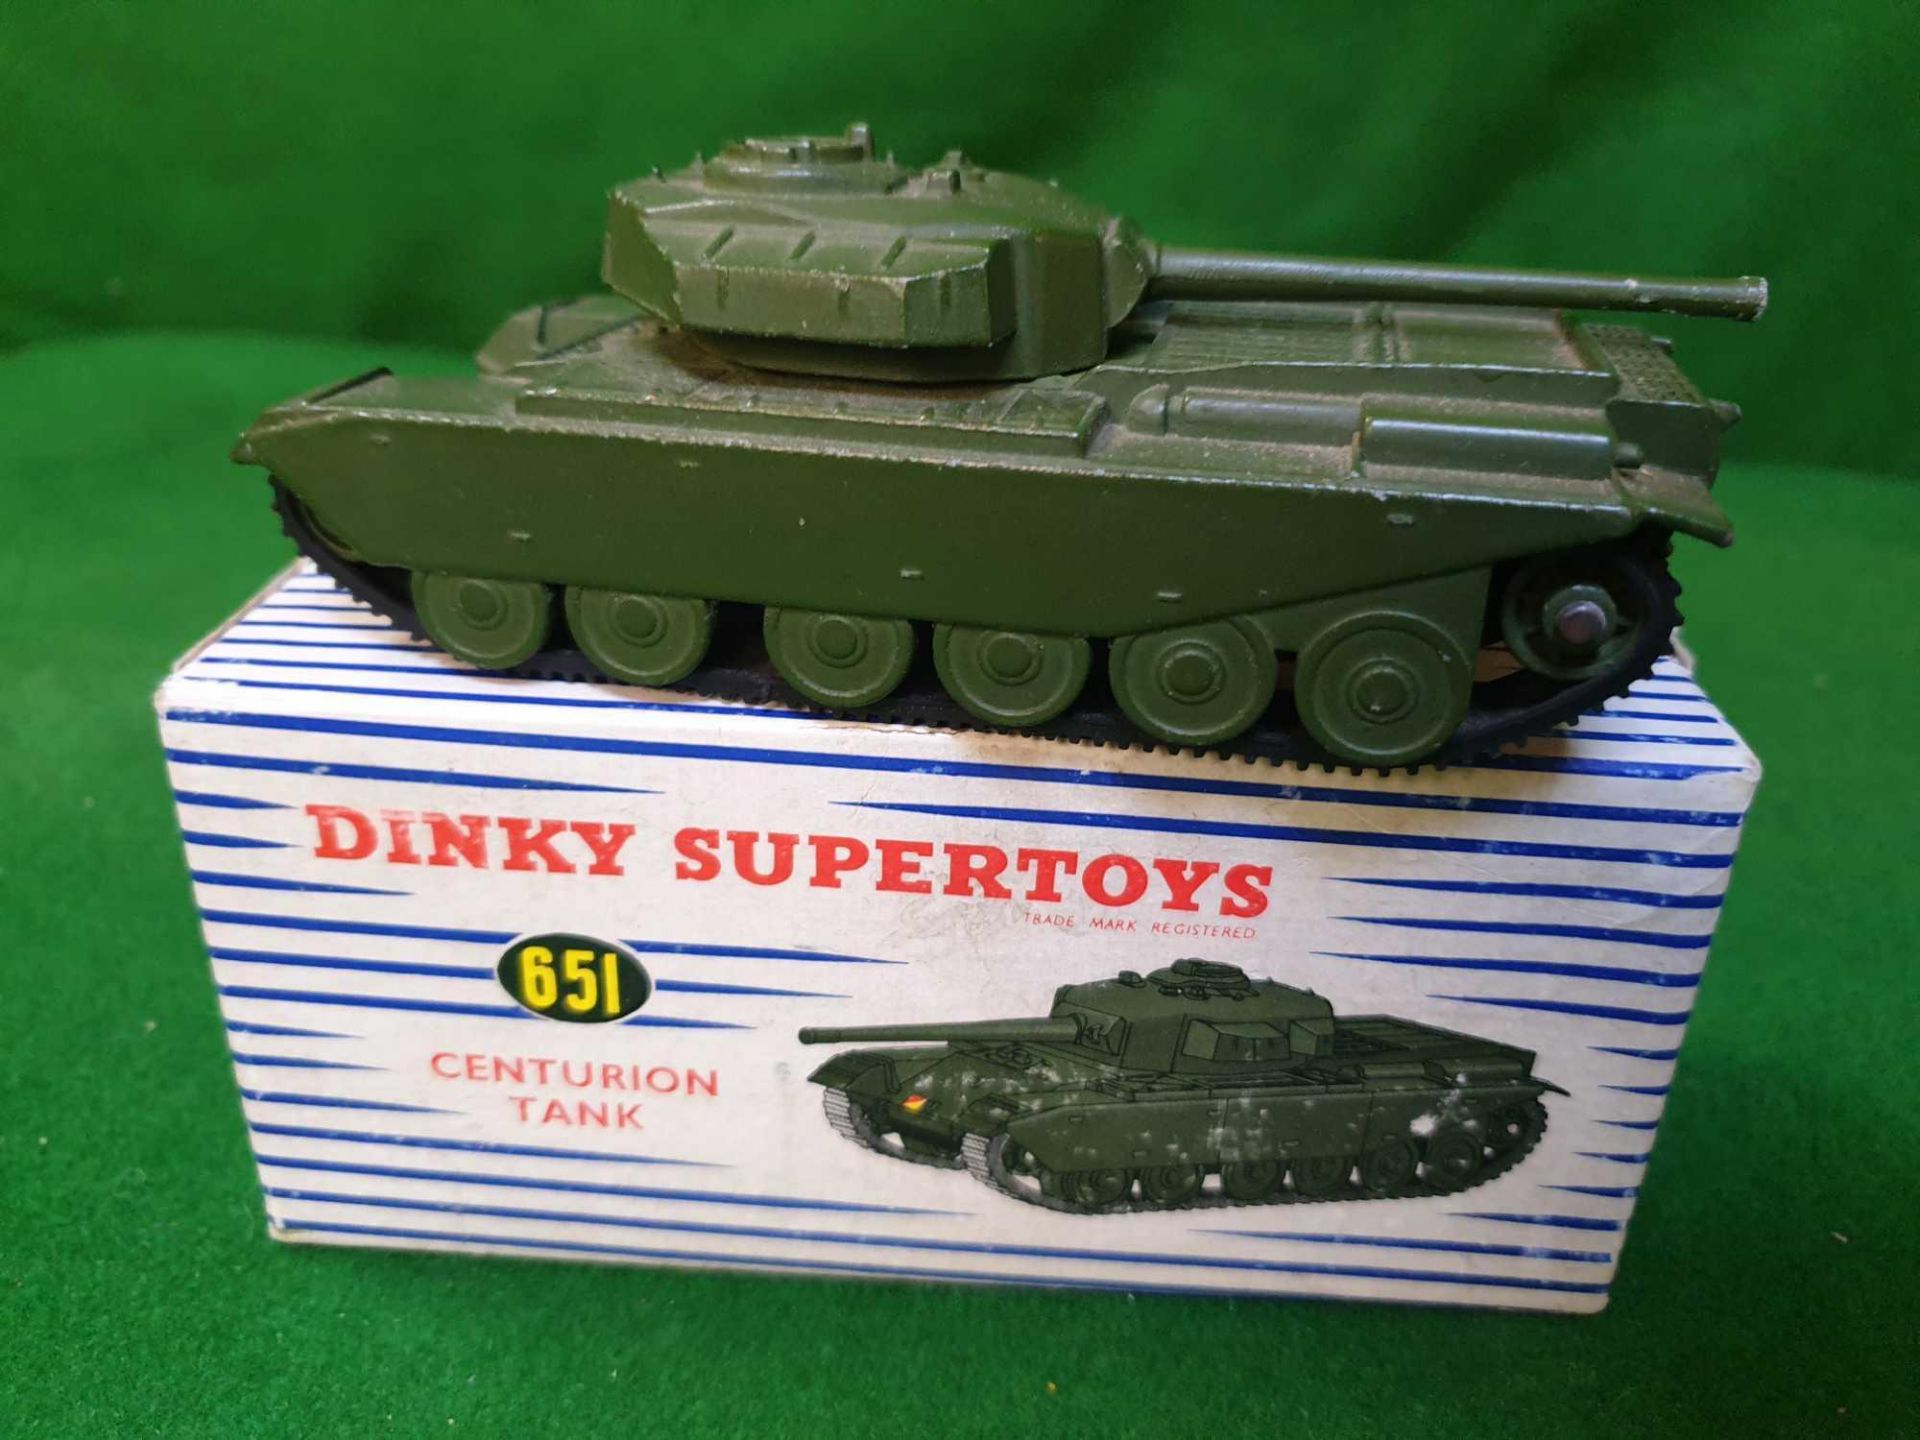 Dinky #651 Centurion Tank Green Rubber Tracks And Rotating Turret In Box 1954-1970 Near Mint In